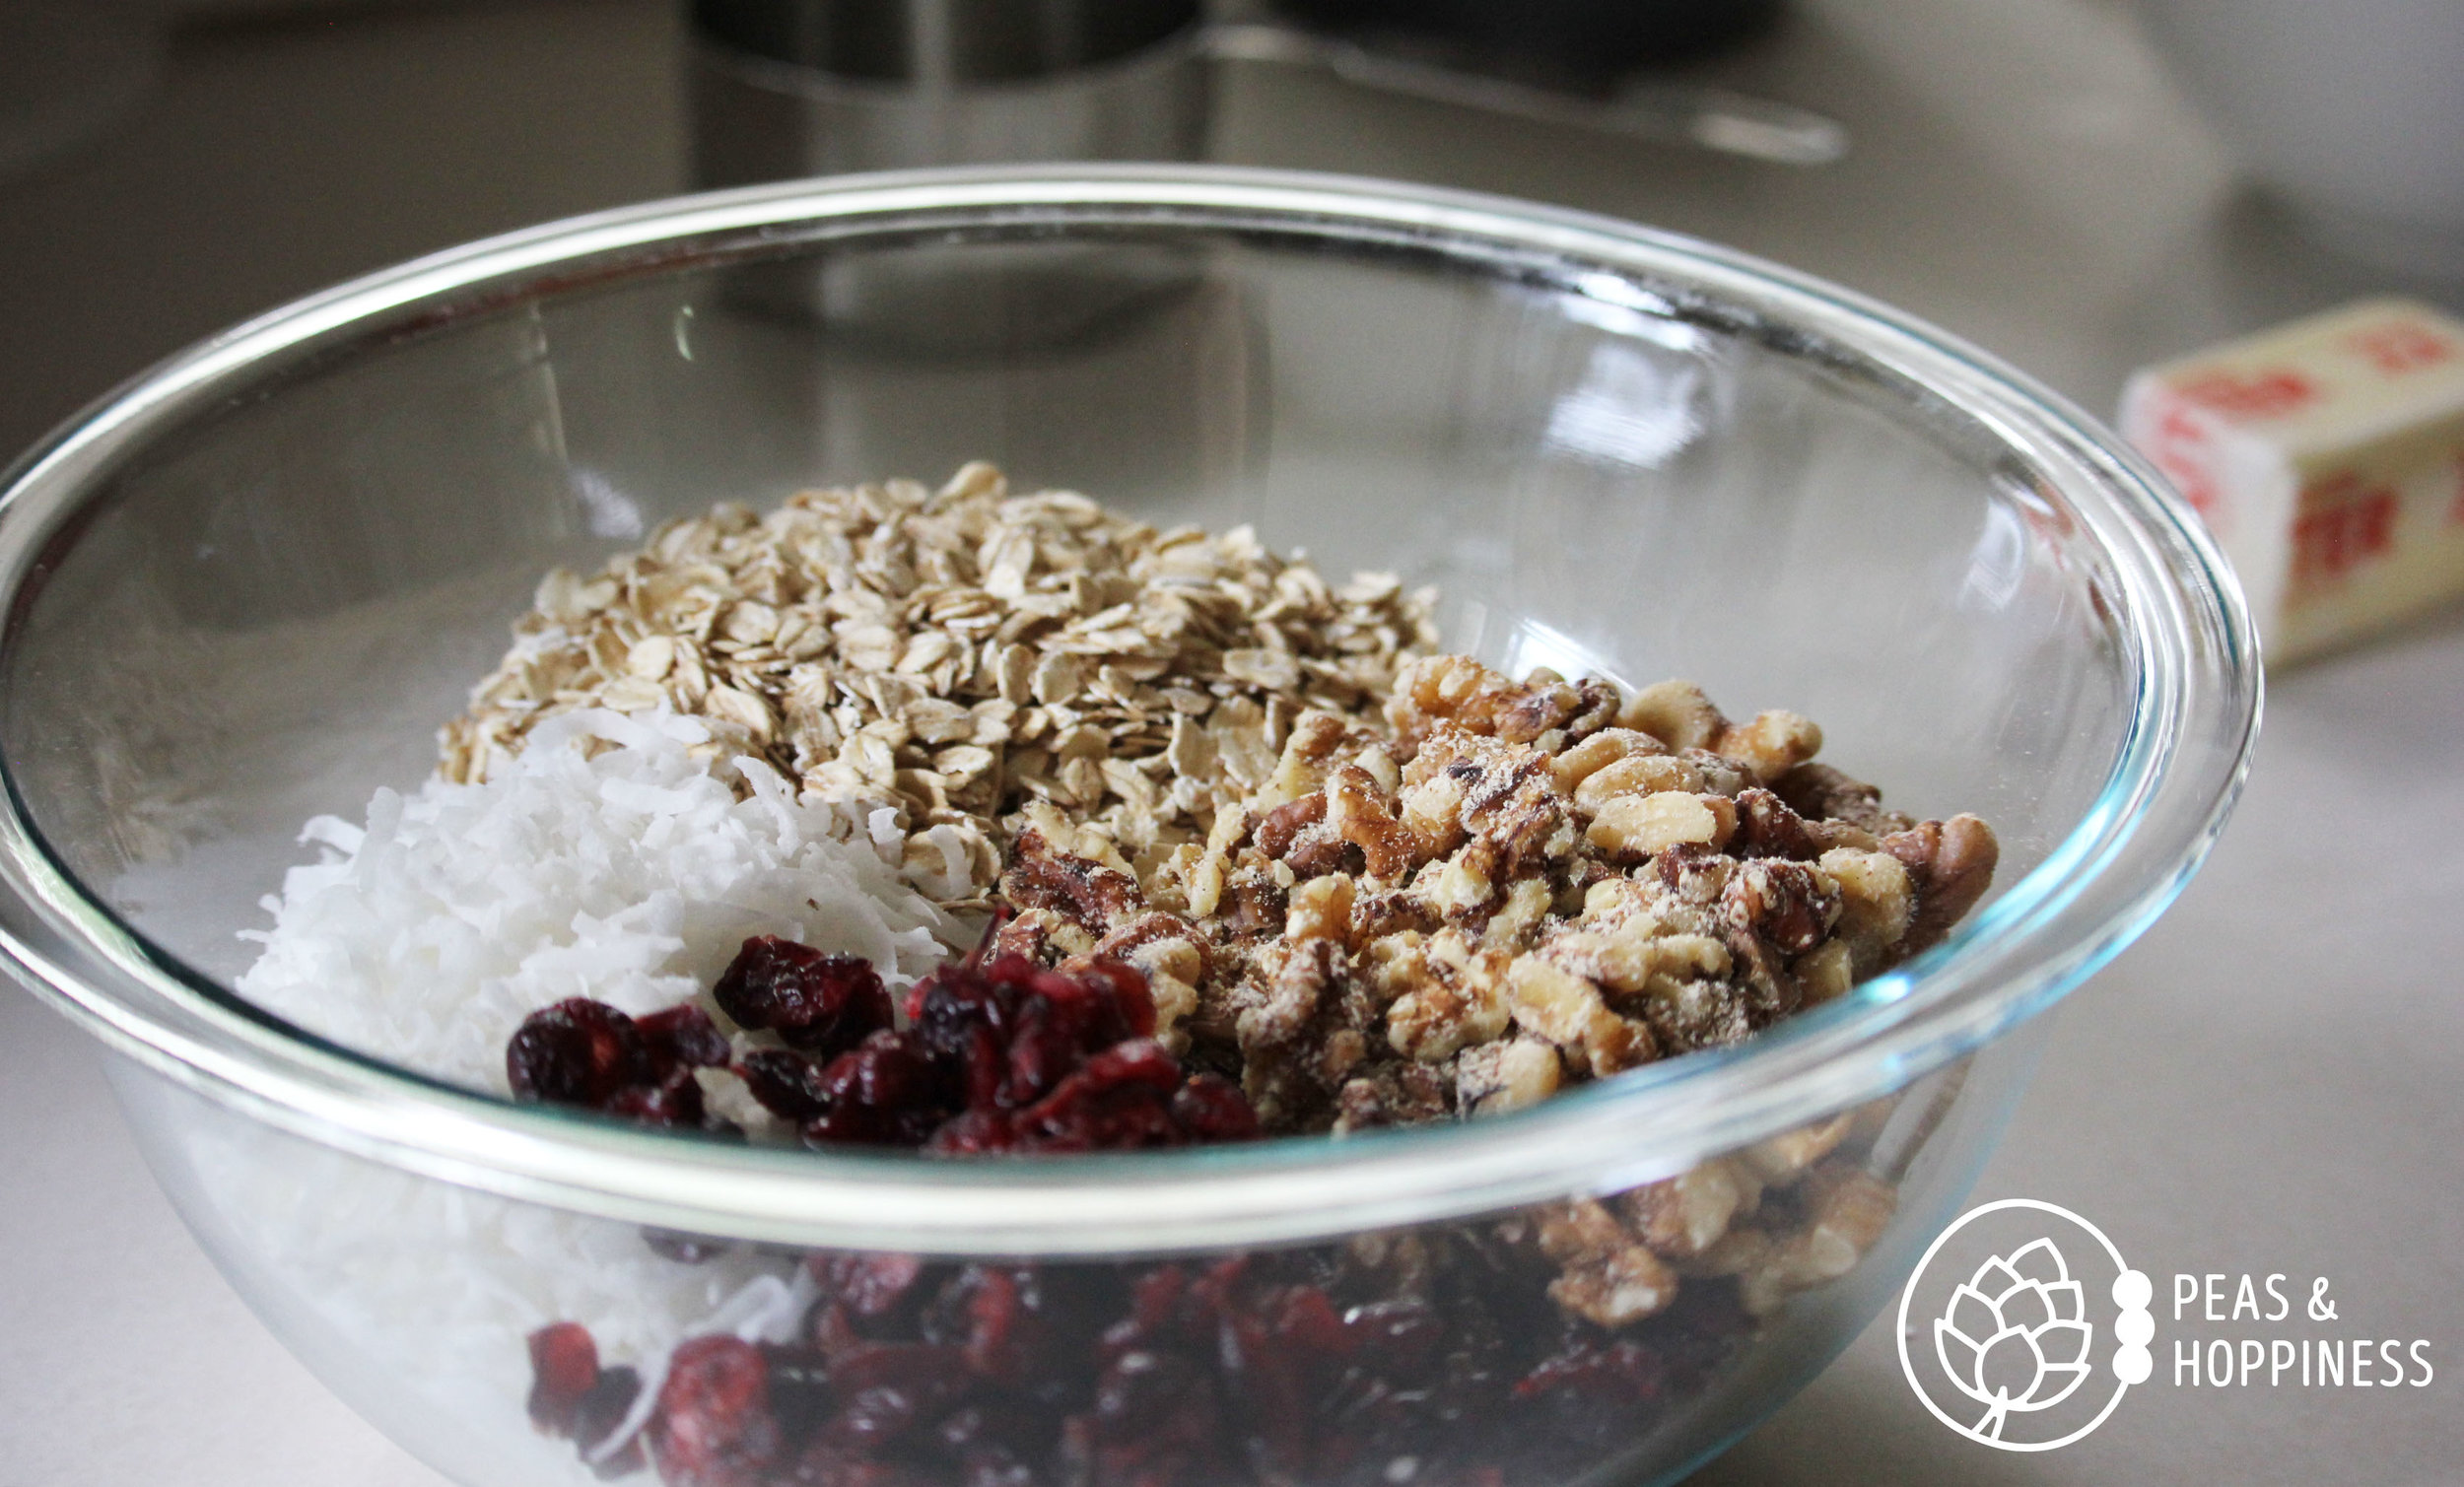 Wholesome, healthy, and alkaline: Easy Coconut Cranberry Granola